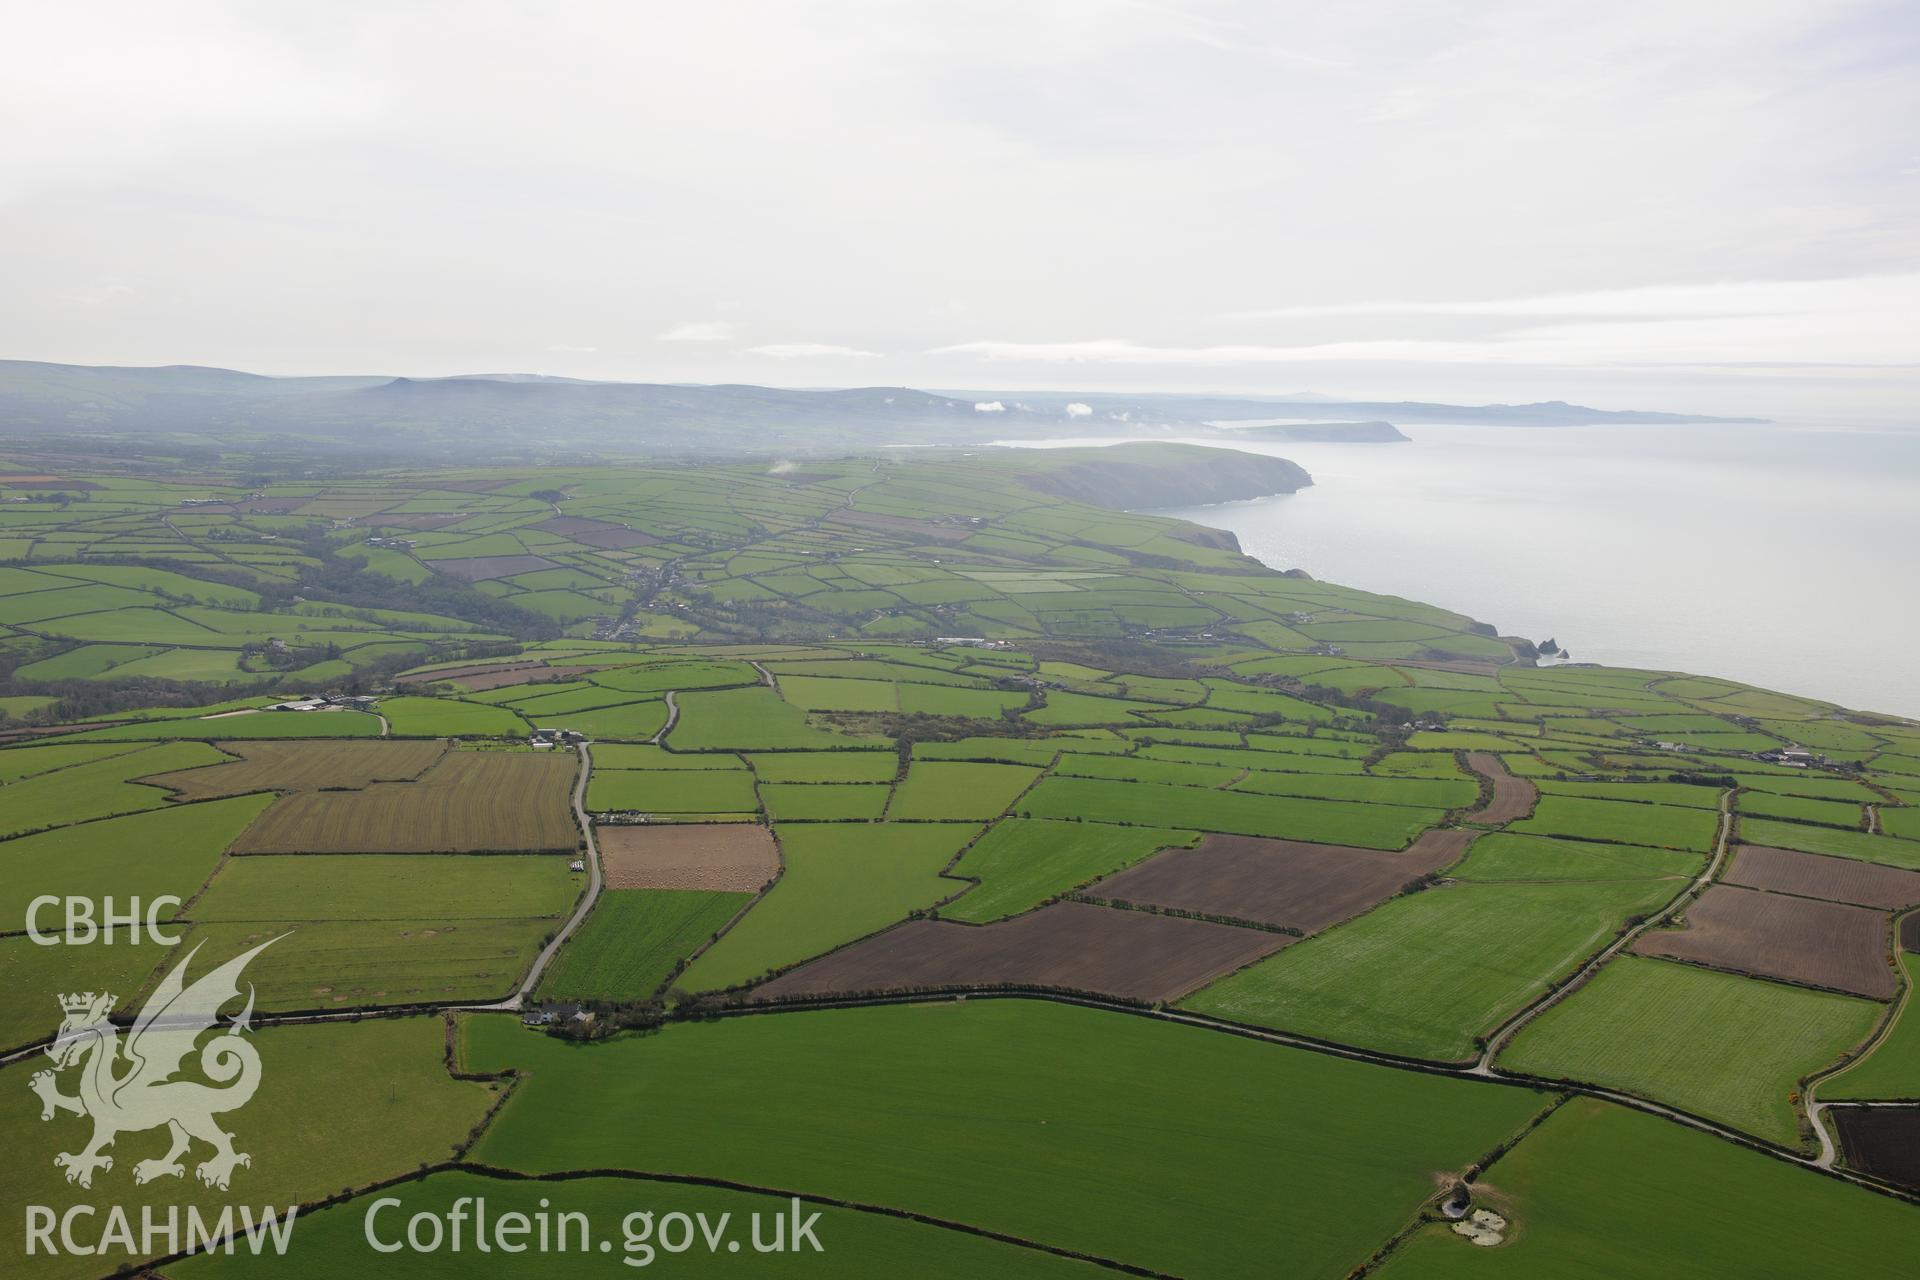 Caerau, Moylgrove and the Pembrokeshire Coast Path between Ceibwr Bay and Foel Hendre. Oblique aerial photograph taken during the Royal Commission's programme of archaeological aerial reconnaissance by Toby Driver on 15th April 2015.